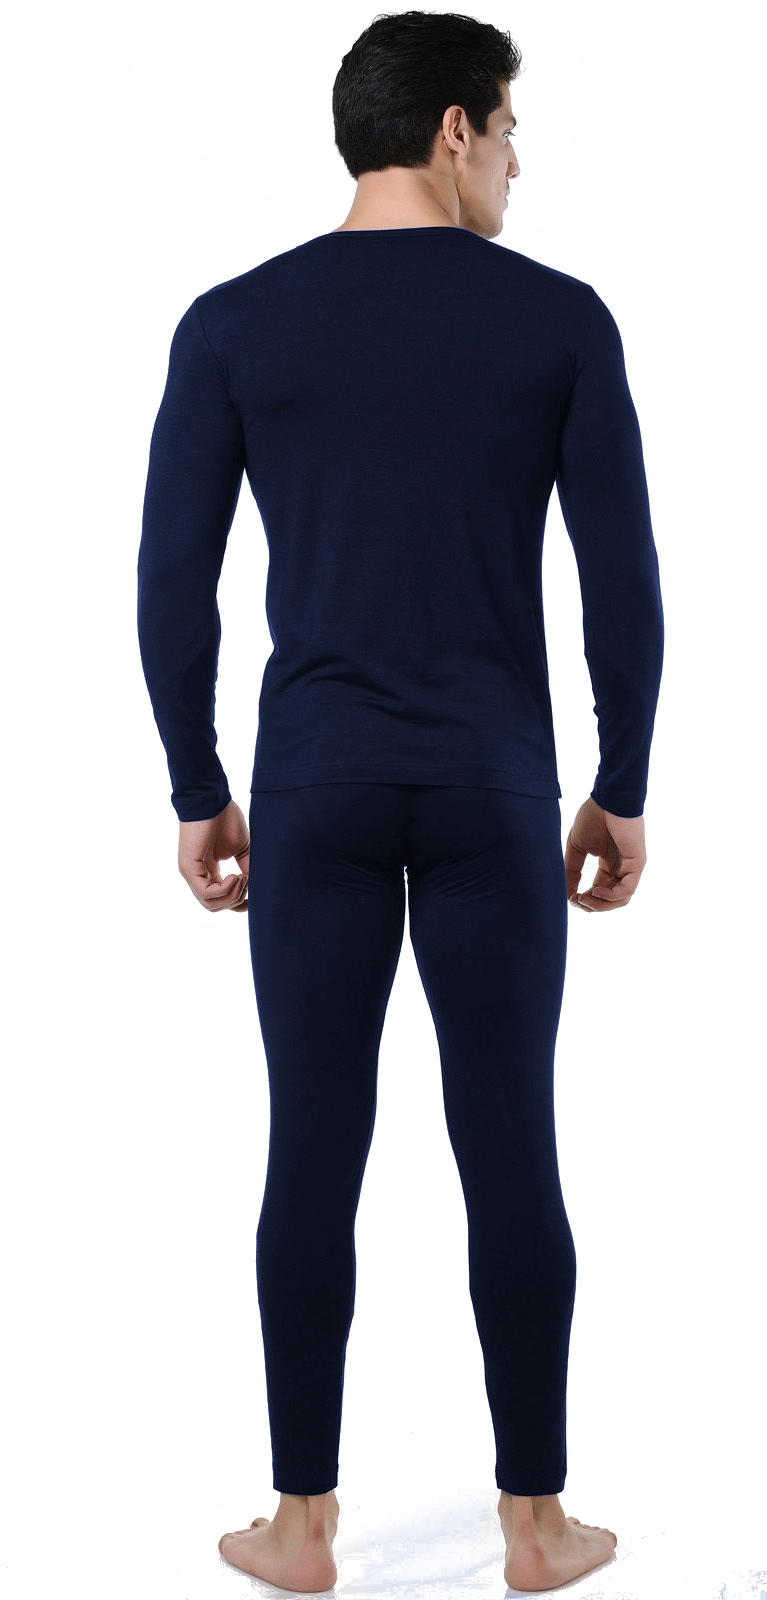 Men’s Ultra-Soft Tagless Fleece Lined Thermal Top & Bottom Underwear Set, Navy Blue, Small - image 3 of 5